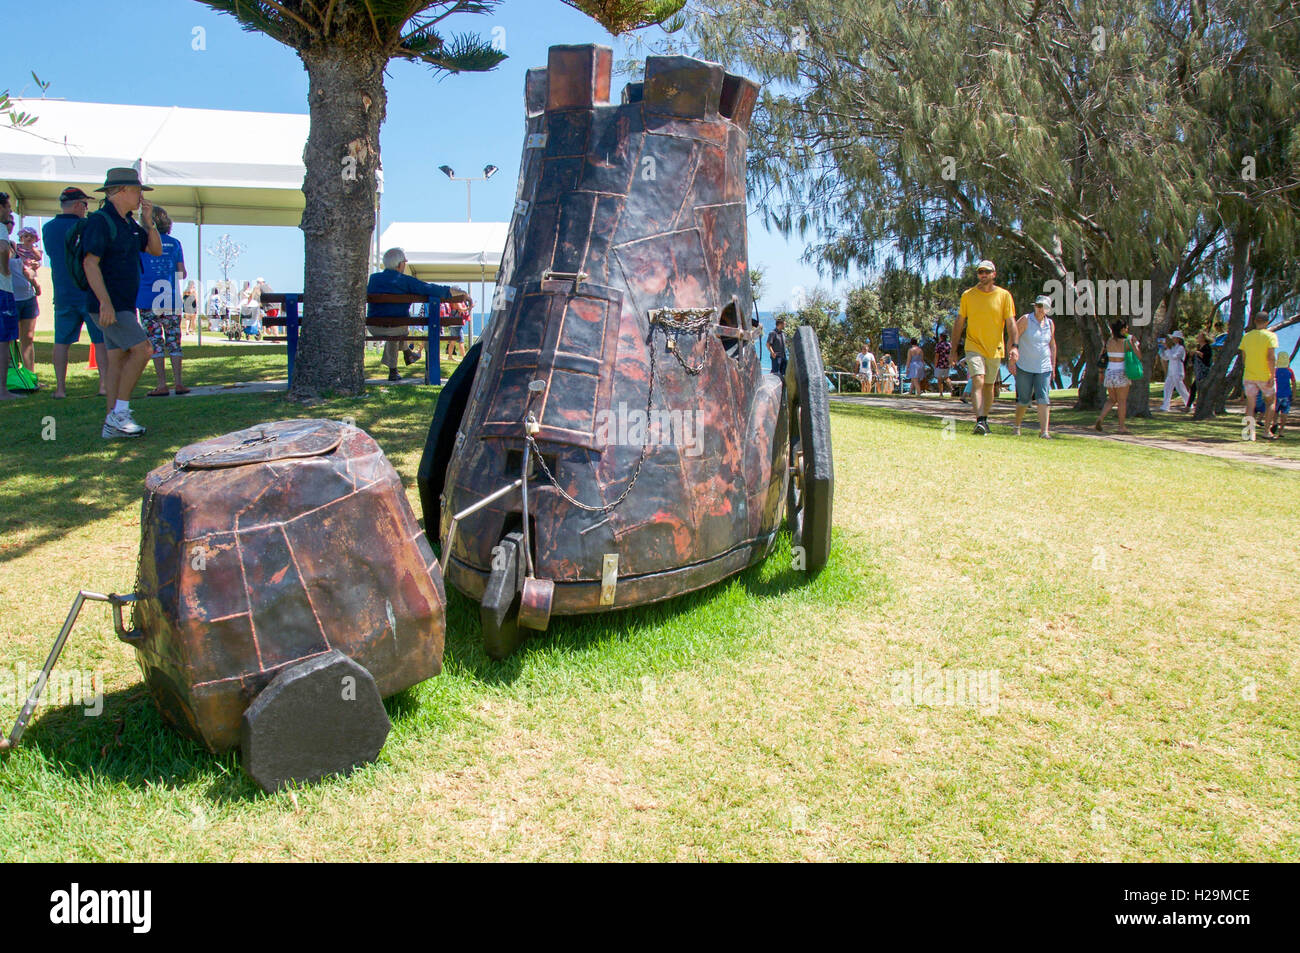 Cottesloe,WA,Australia-March 12,2016:Steampunk sculpture at Sculptures by the Sea with people in Cottesloe, Western Australia. Stock Photo